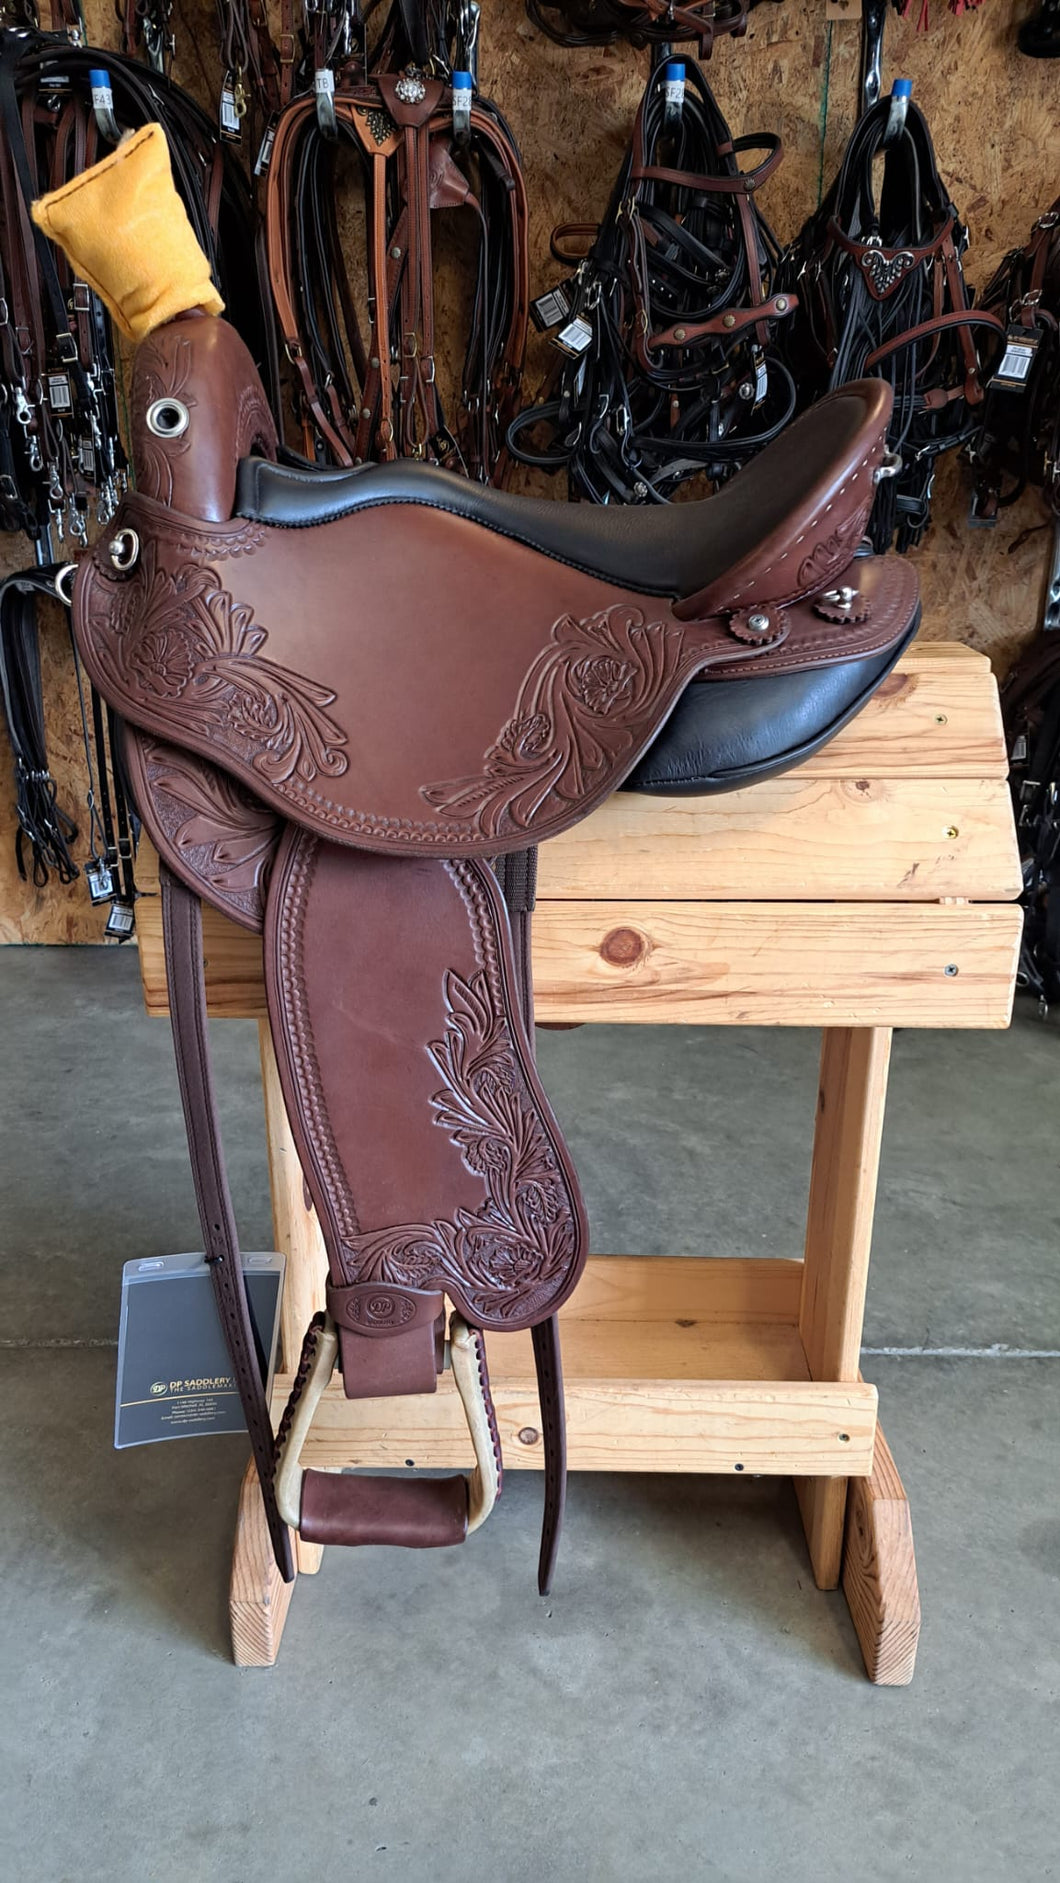 dp saddlery quantum short and light western with a western dressage seat 6324, side view on a wooden saddle rack, horse tack in the background